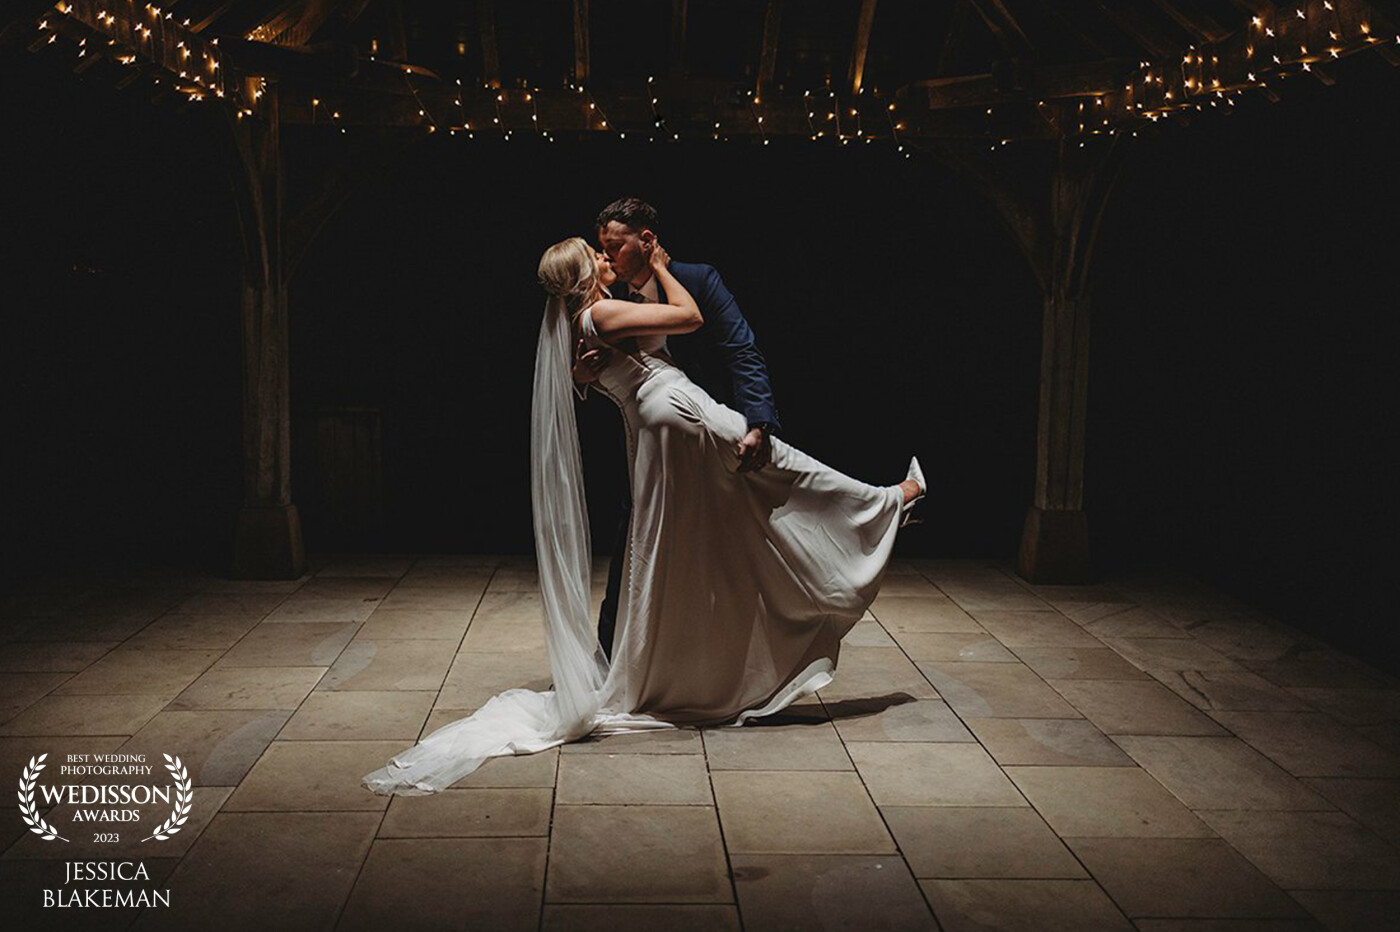 A truly beautiful day at Sandhole Oak Barn ended with an evening dance under the spotlight. I noticed how the light interacted with the couple, creating shadows and shapes on the Brides dress as they embraced.